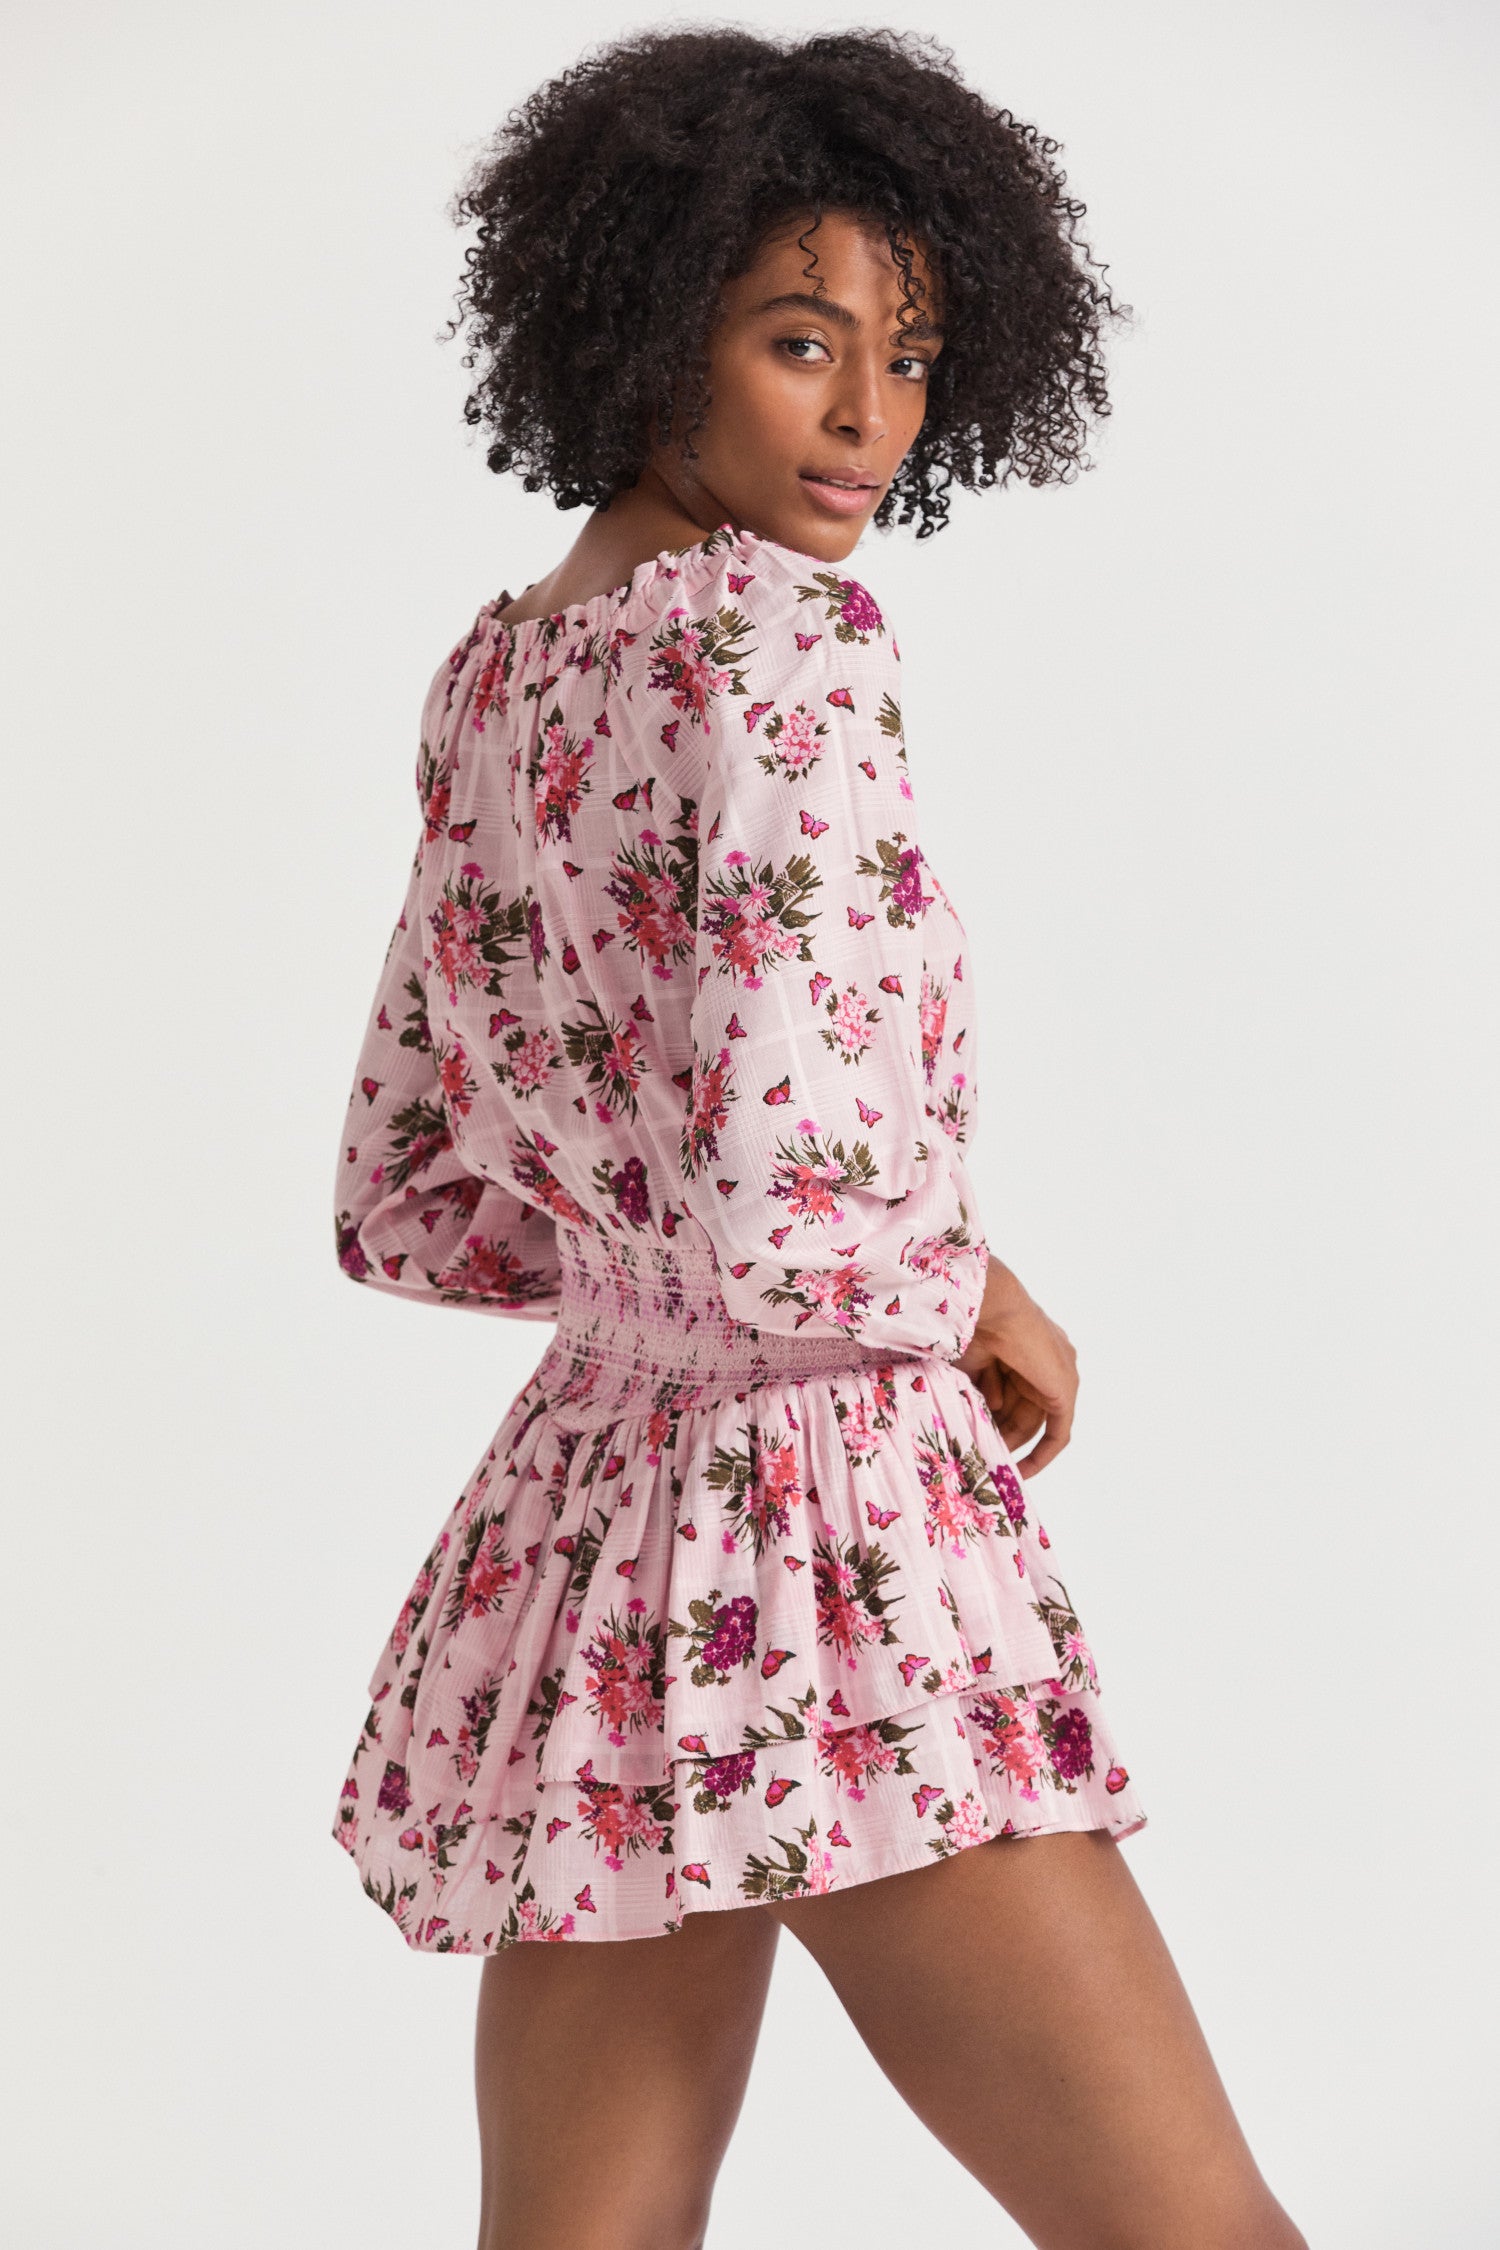 Pink mini dress with a pink floral print. Featuring an elasticated neck opening with a tie at the front, an easy bodice with a stretchy smocked waist that releases into a tiered skirt that hikes up slightly on each side.